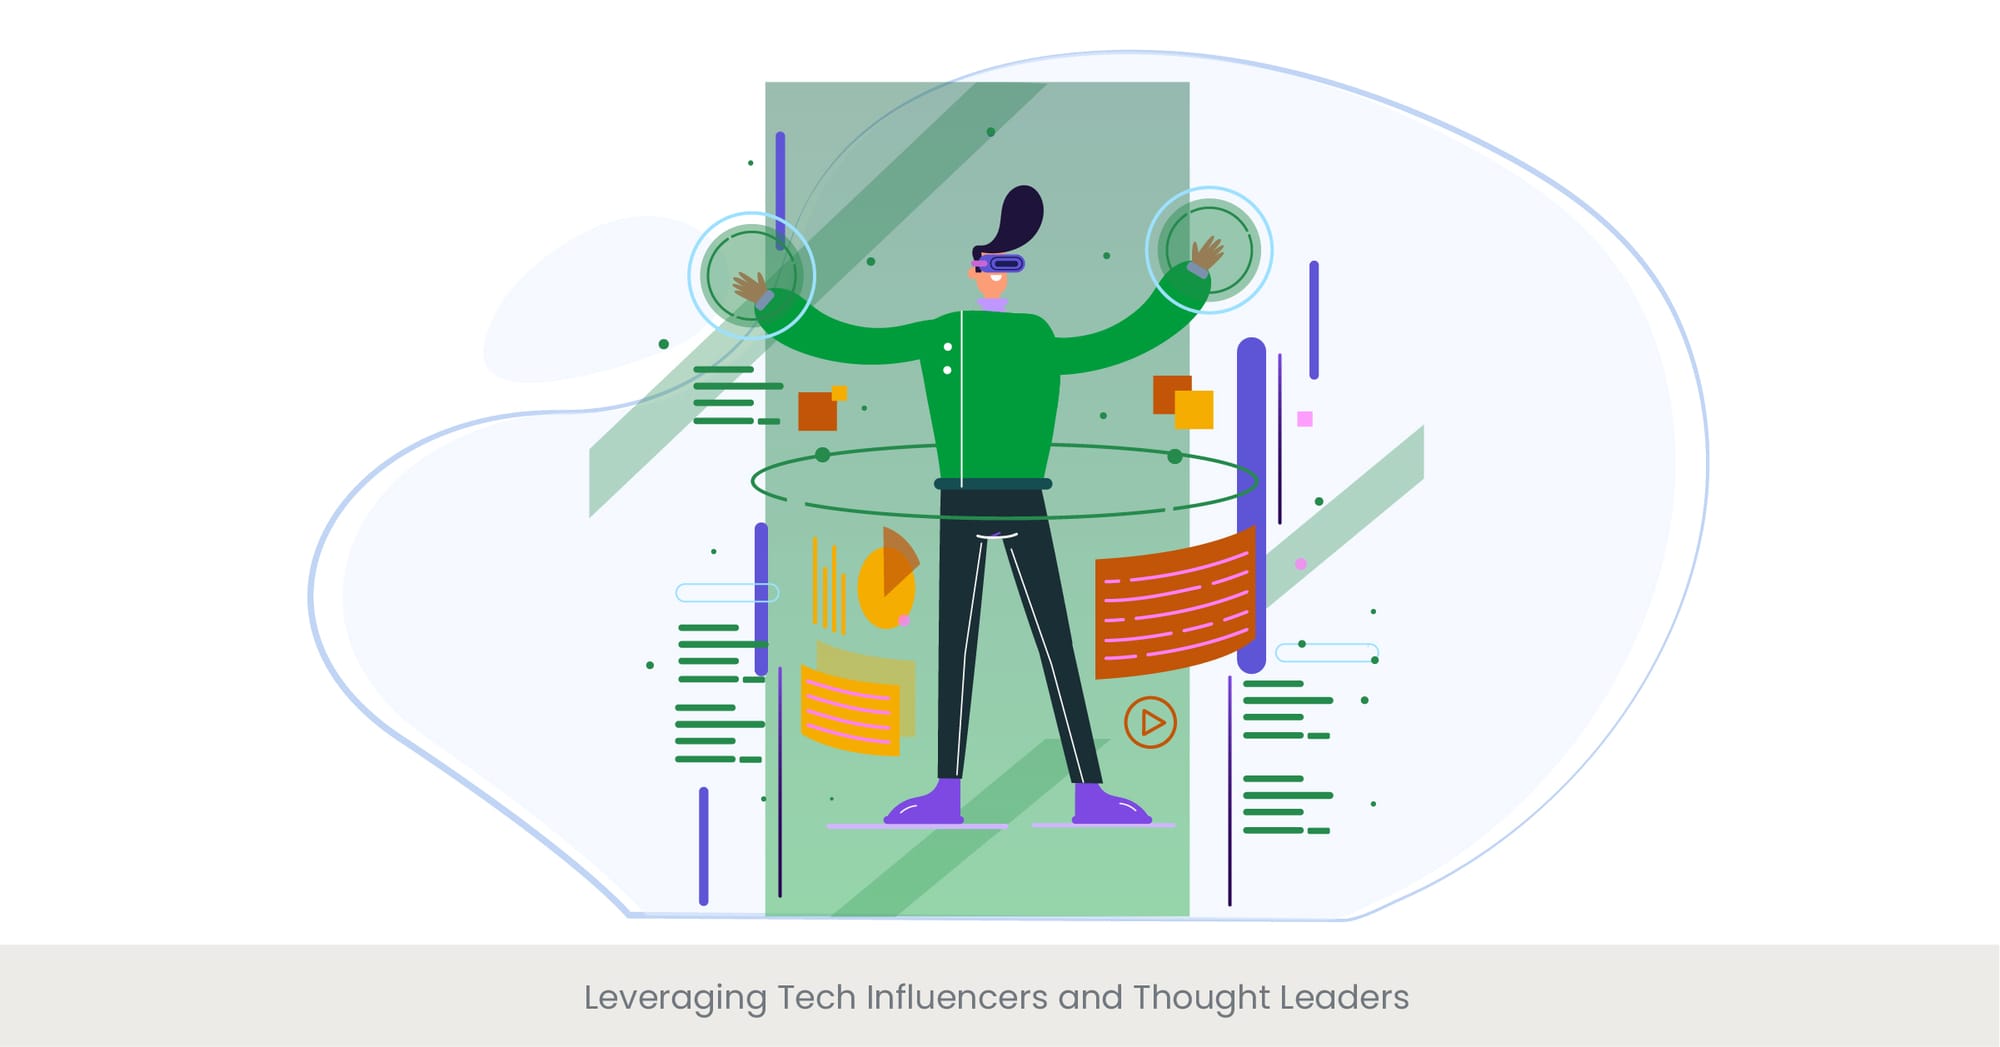 Leveraging Tech Influencers and Thought Leaders